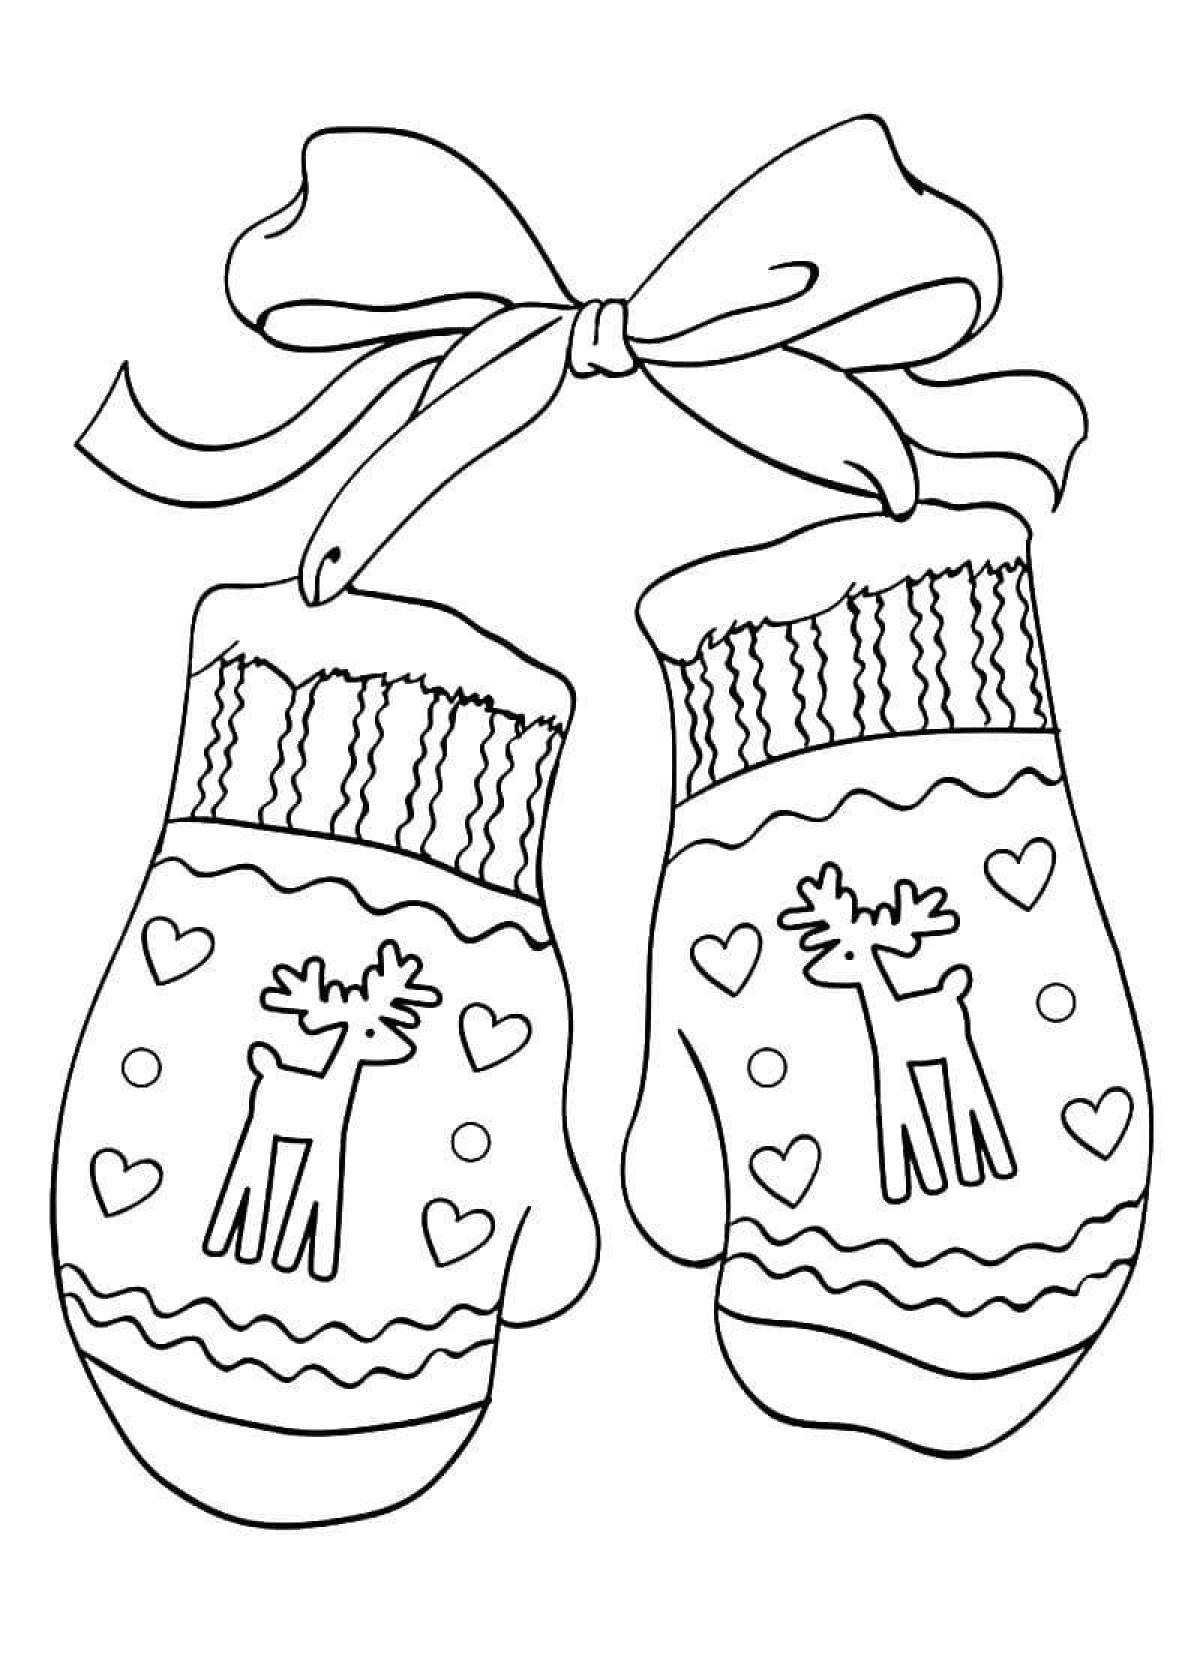 Amazing coloring book mittens for babies